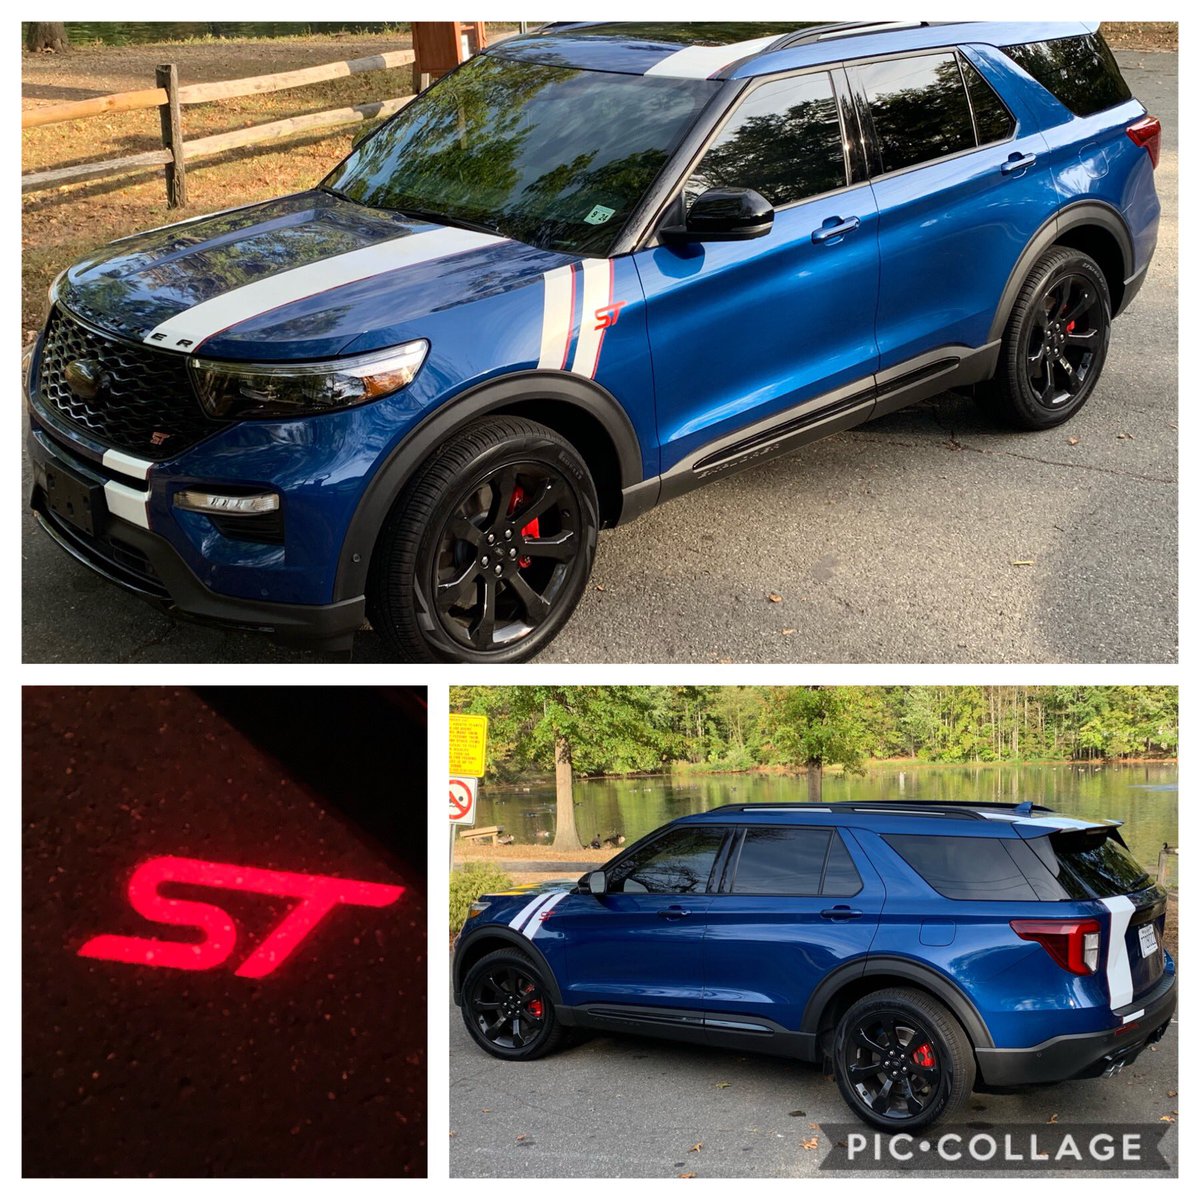 Uzivatel All American Ford In Old Bridge Na Twitteru One Of Our Loyal Customers Who Loves Customizing Her Suvs Sent Us This To Share We Love It This Custom Ford